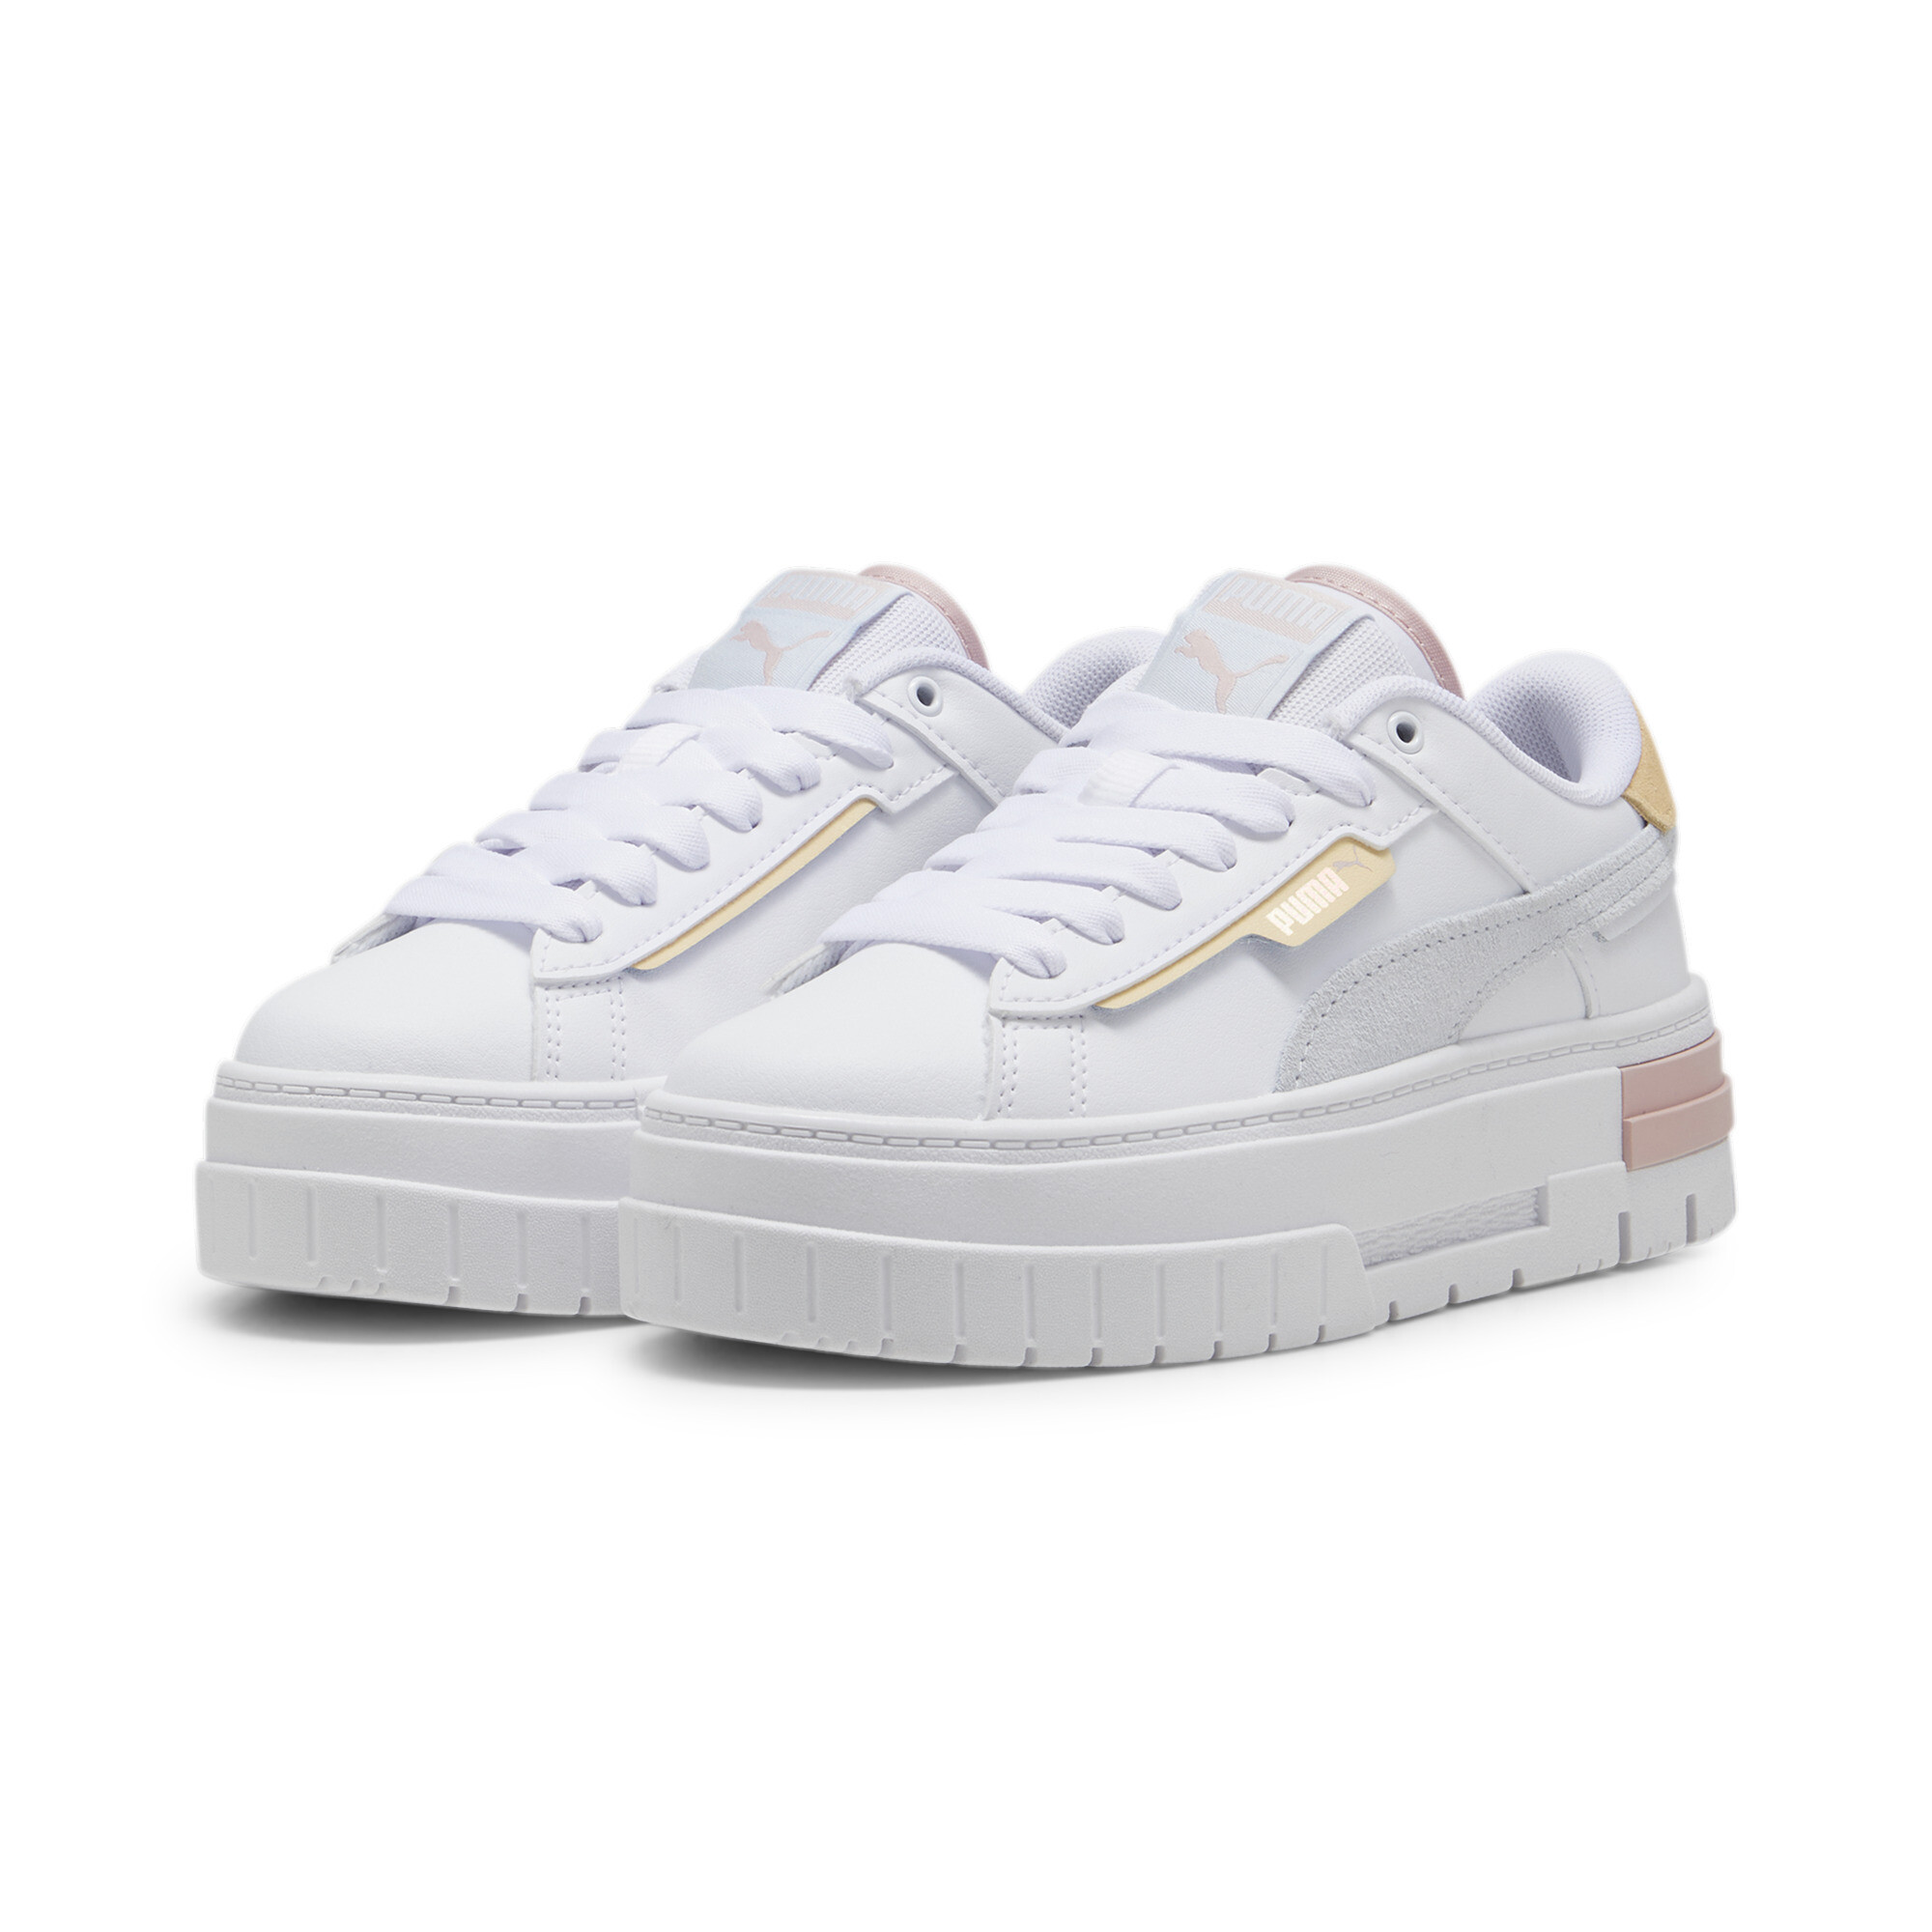 Women's Puma Mayze Crashed Youth Sneakers, White, Size 35.5, Shoes